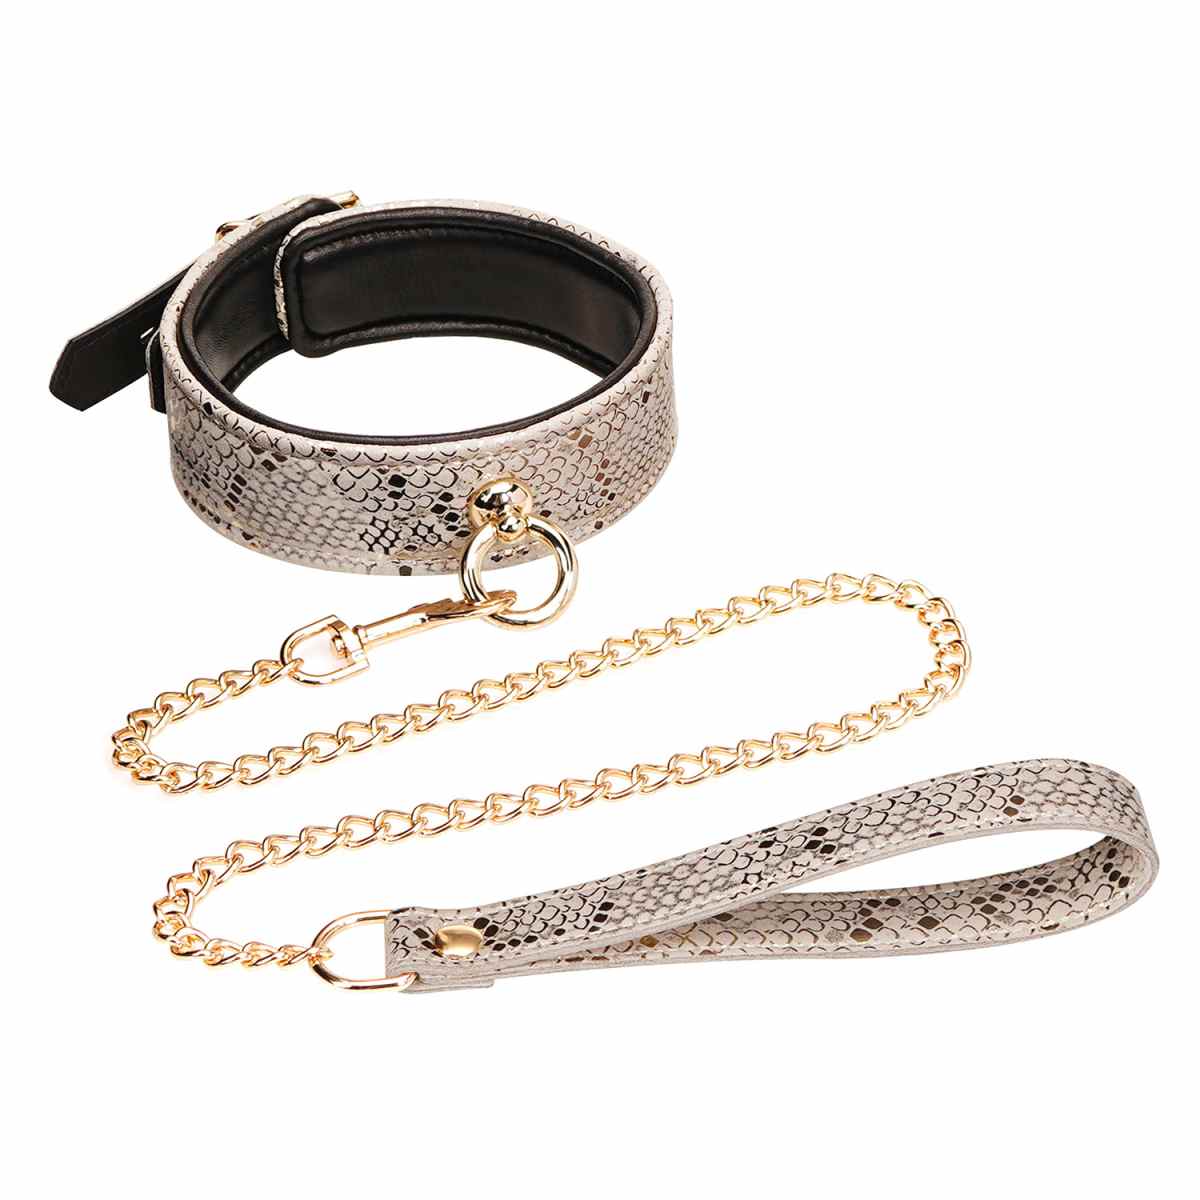 MICROFIBER SNAKE PRINT COLLAR & LEASH WHITE W LEATHER LINING - Click Image to Close